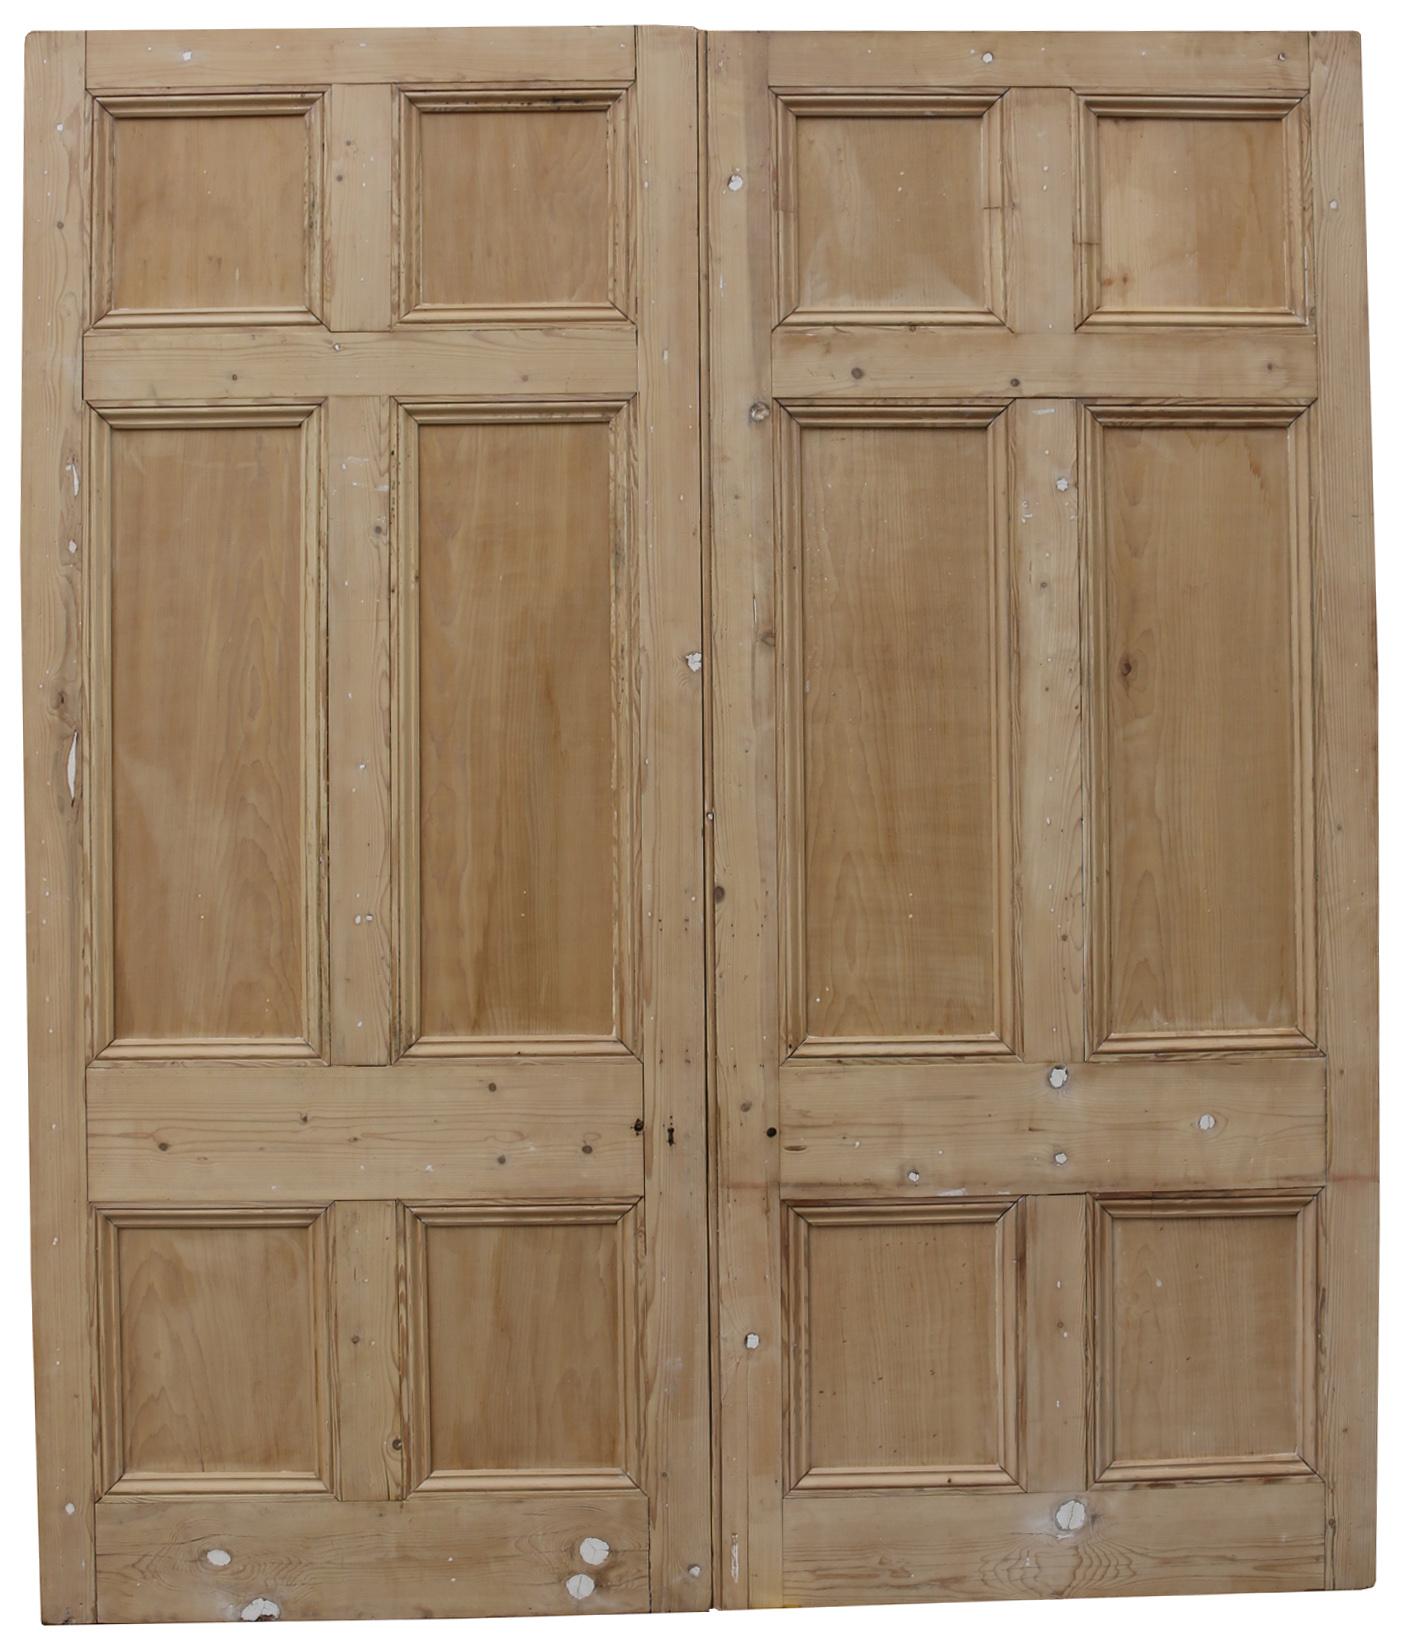 These doors have a stripped and sanded finish and have a rebate.
Measure: Weight 45 kg each.